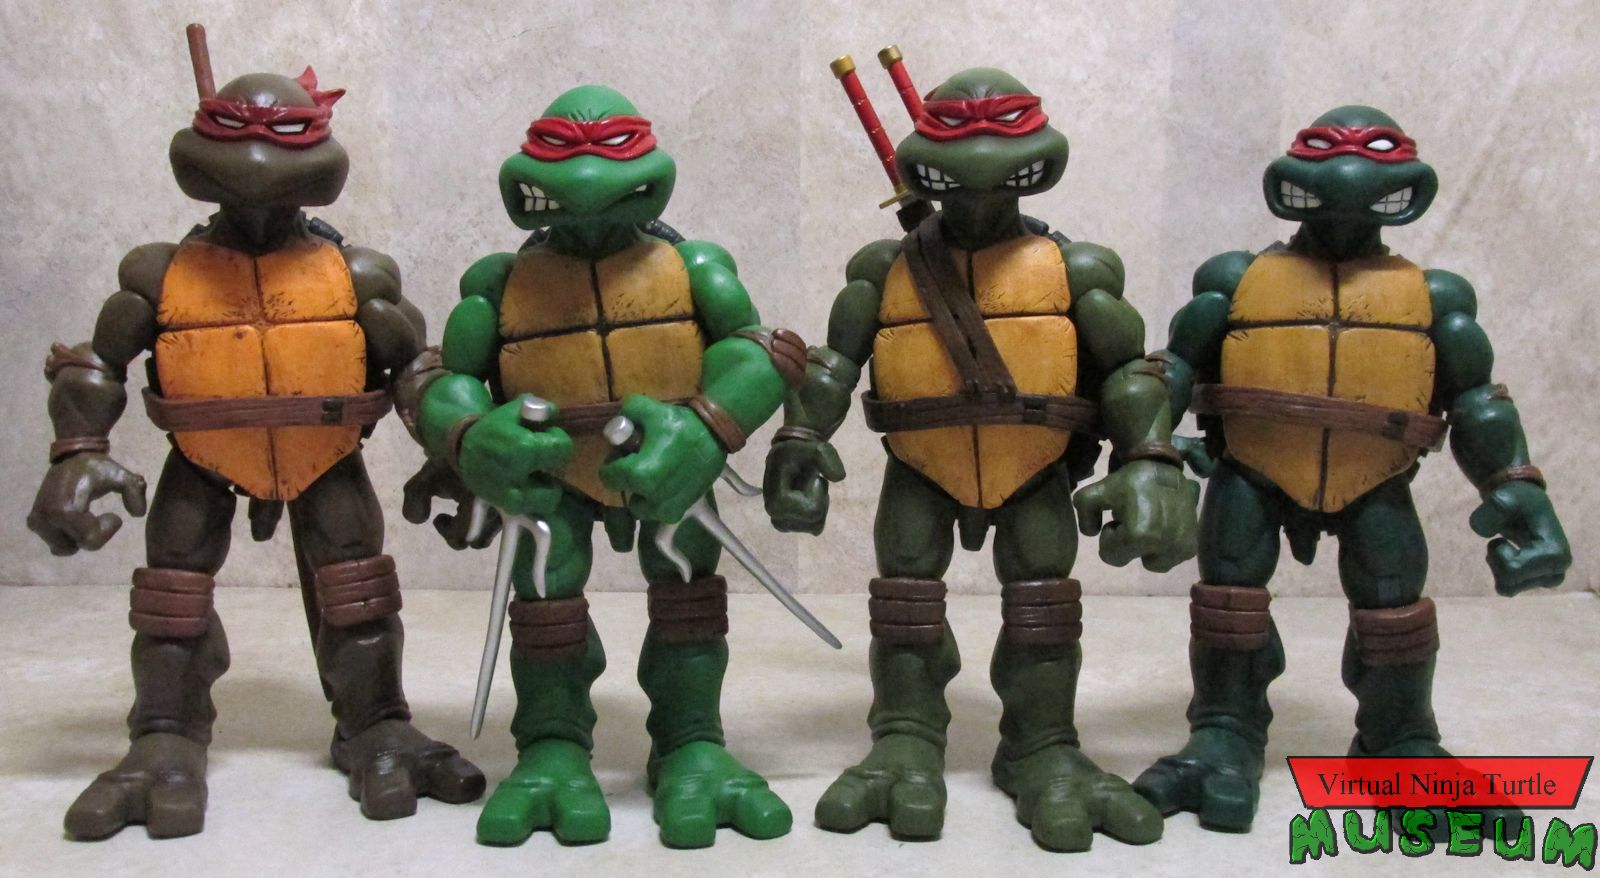 Turtles with red masks